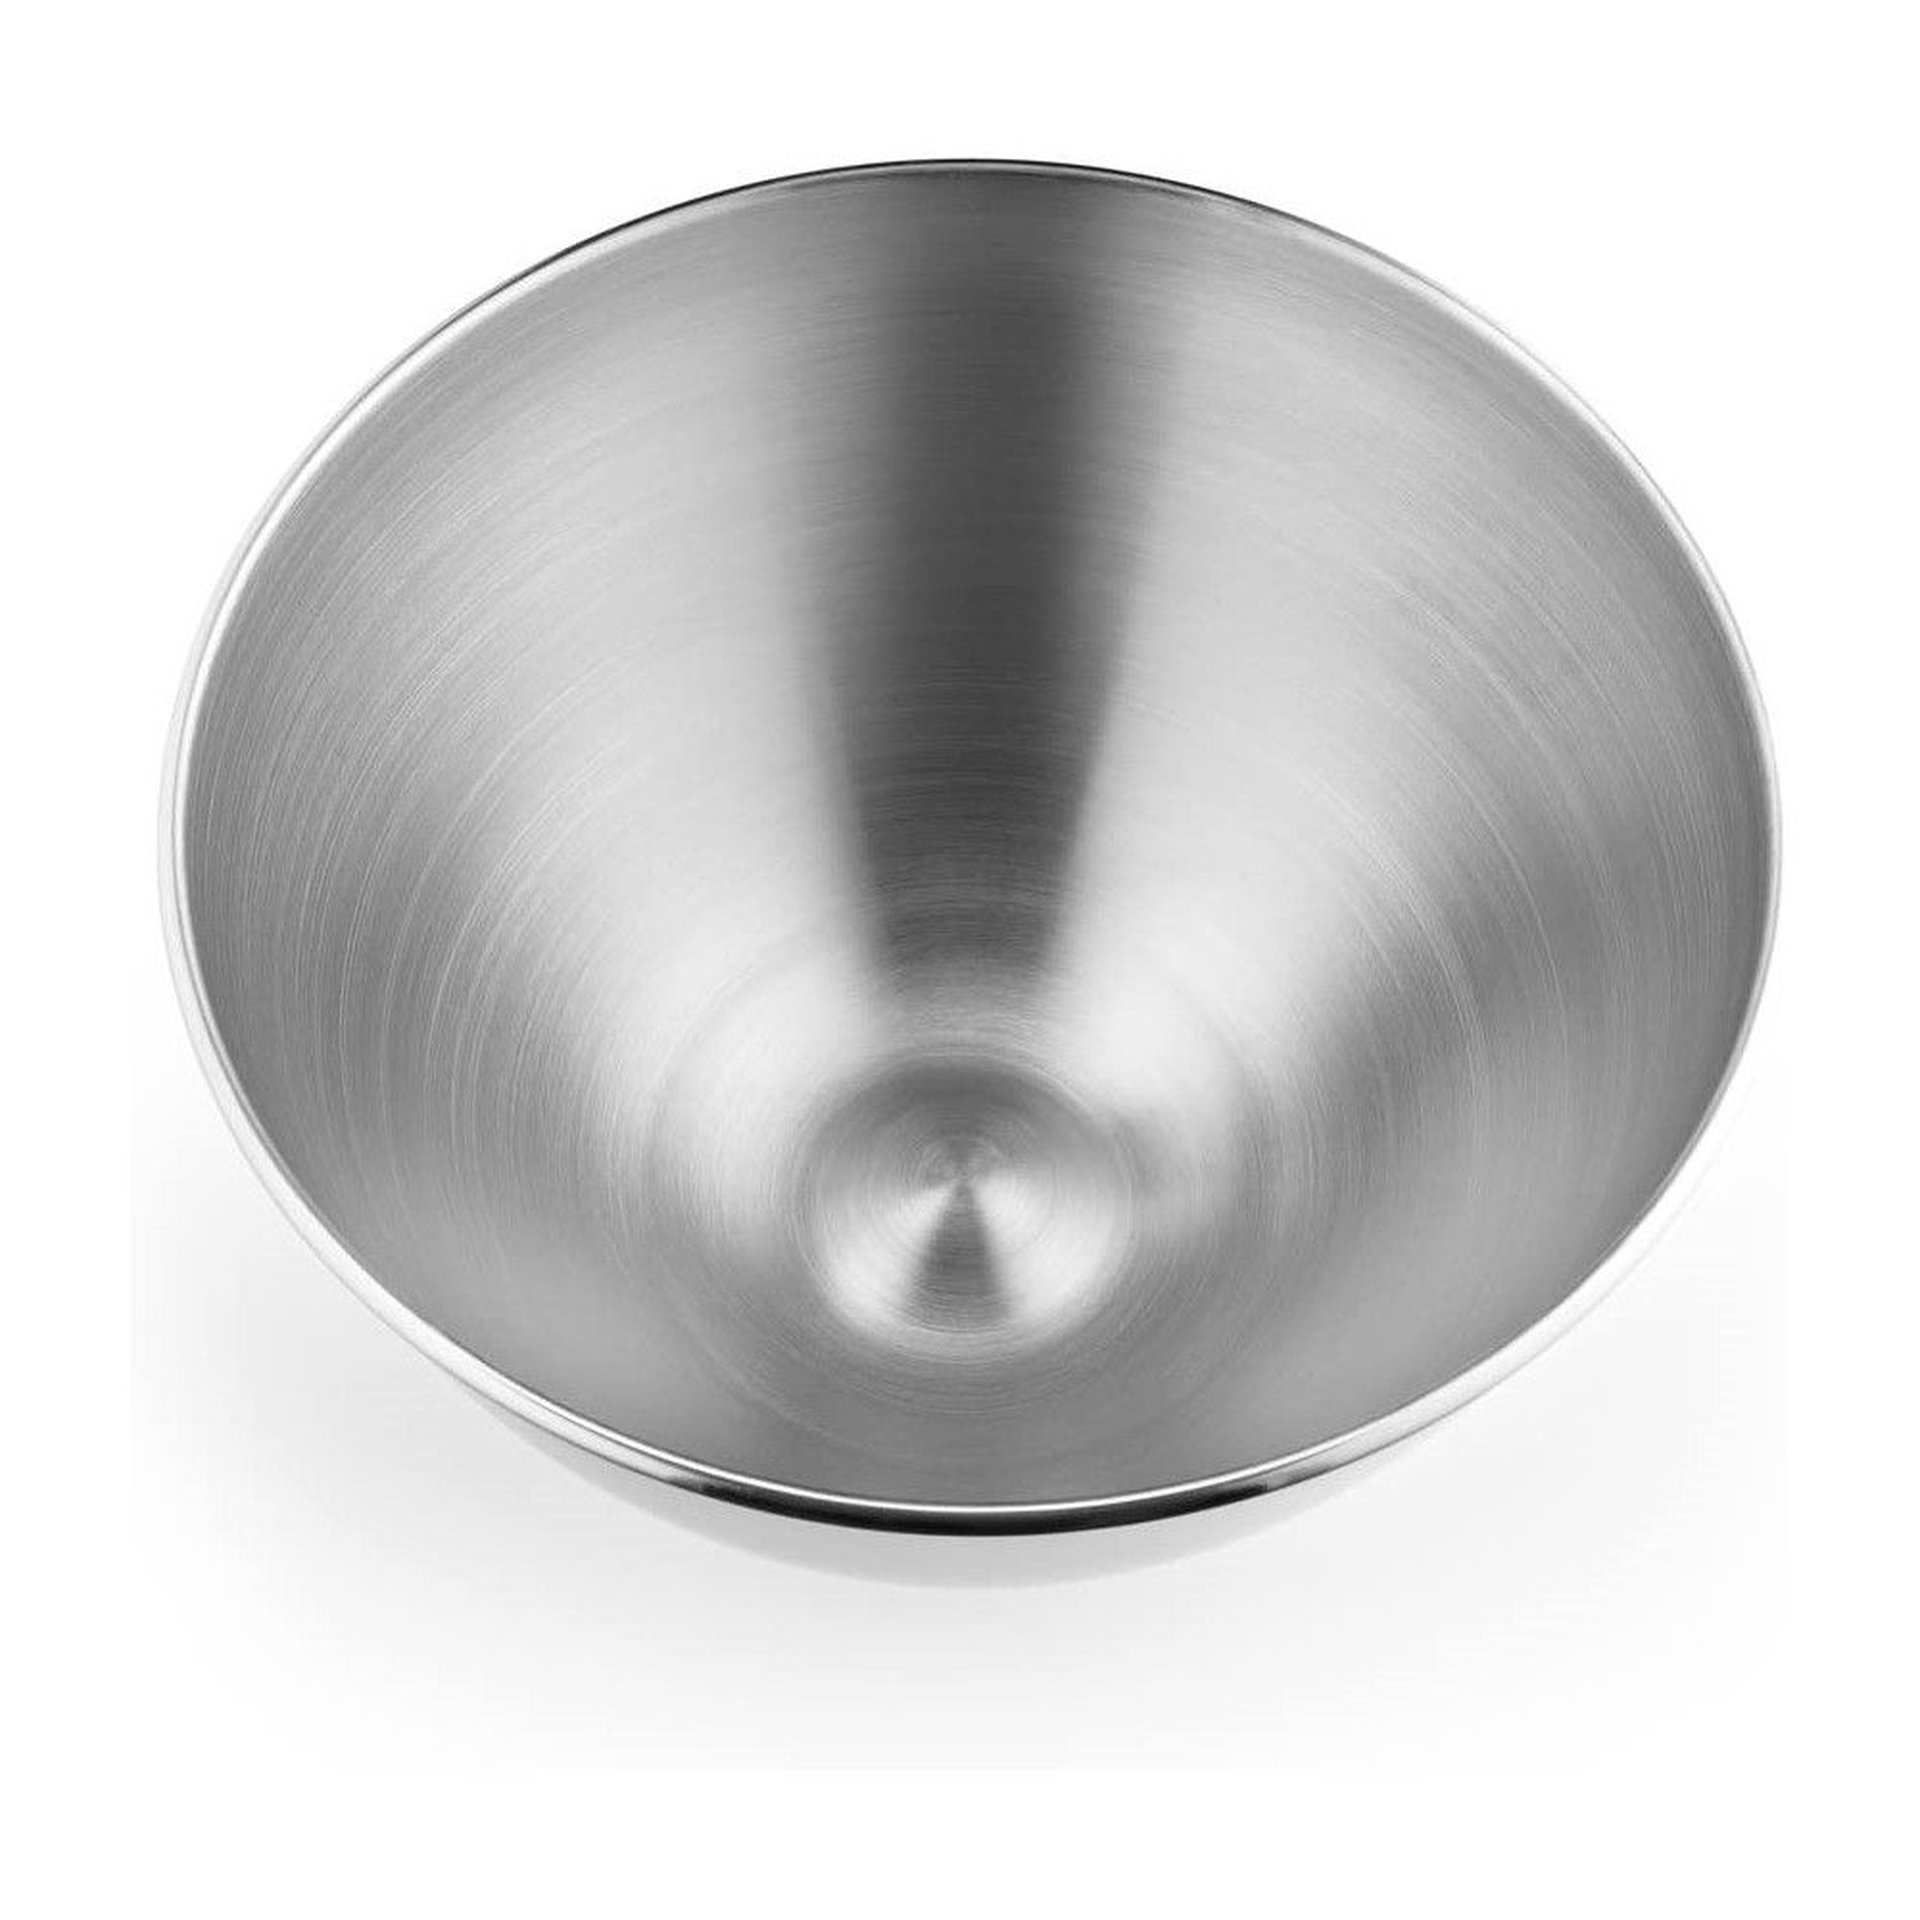 Stainless Steel Mixing Bowl Suitable For Kitchenaid